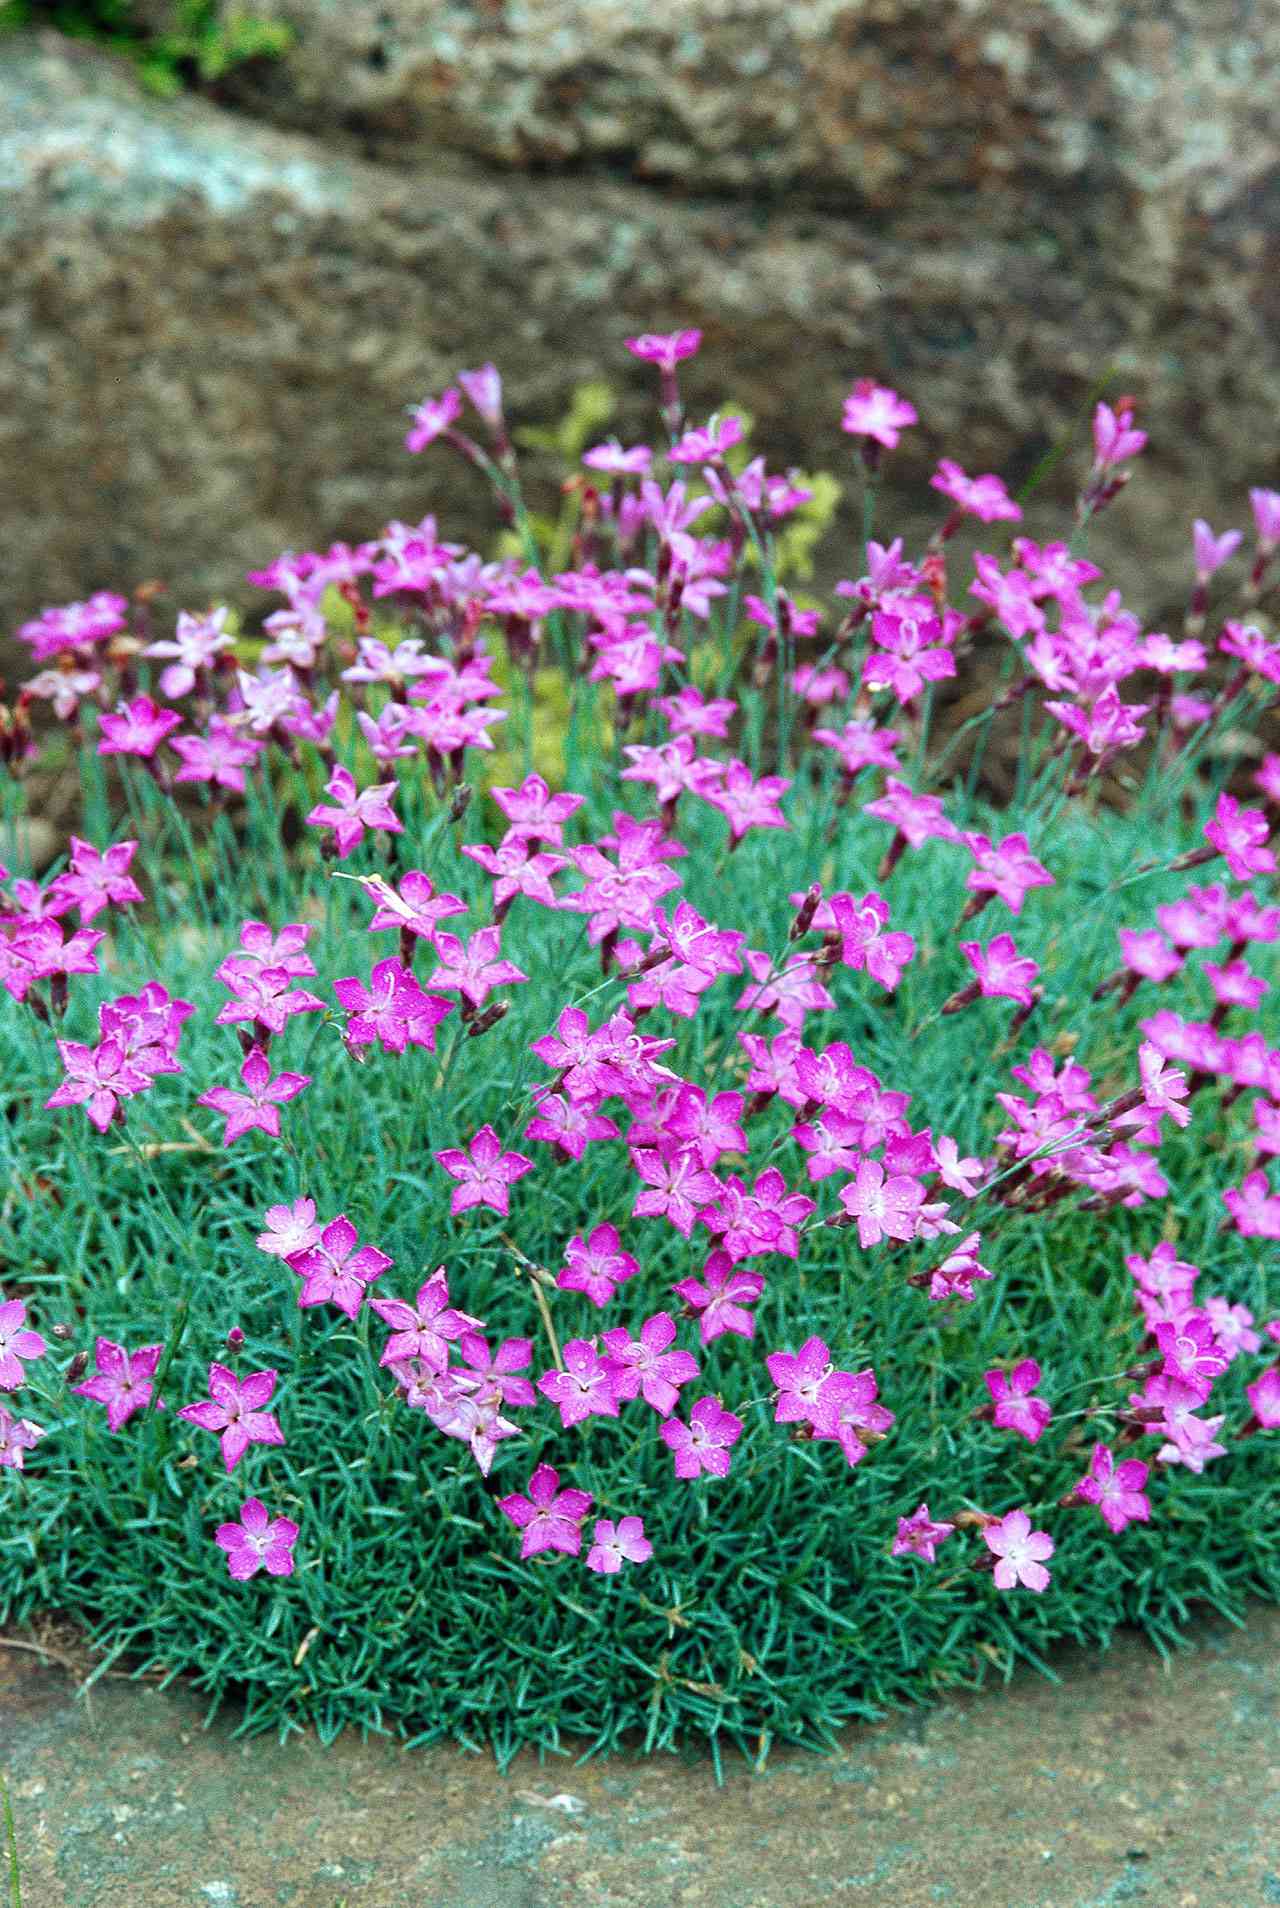 Drought Tolerant Groundcovers Better, Small Pink Ground Cover Plants Full Sun Low Maintenance Australia